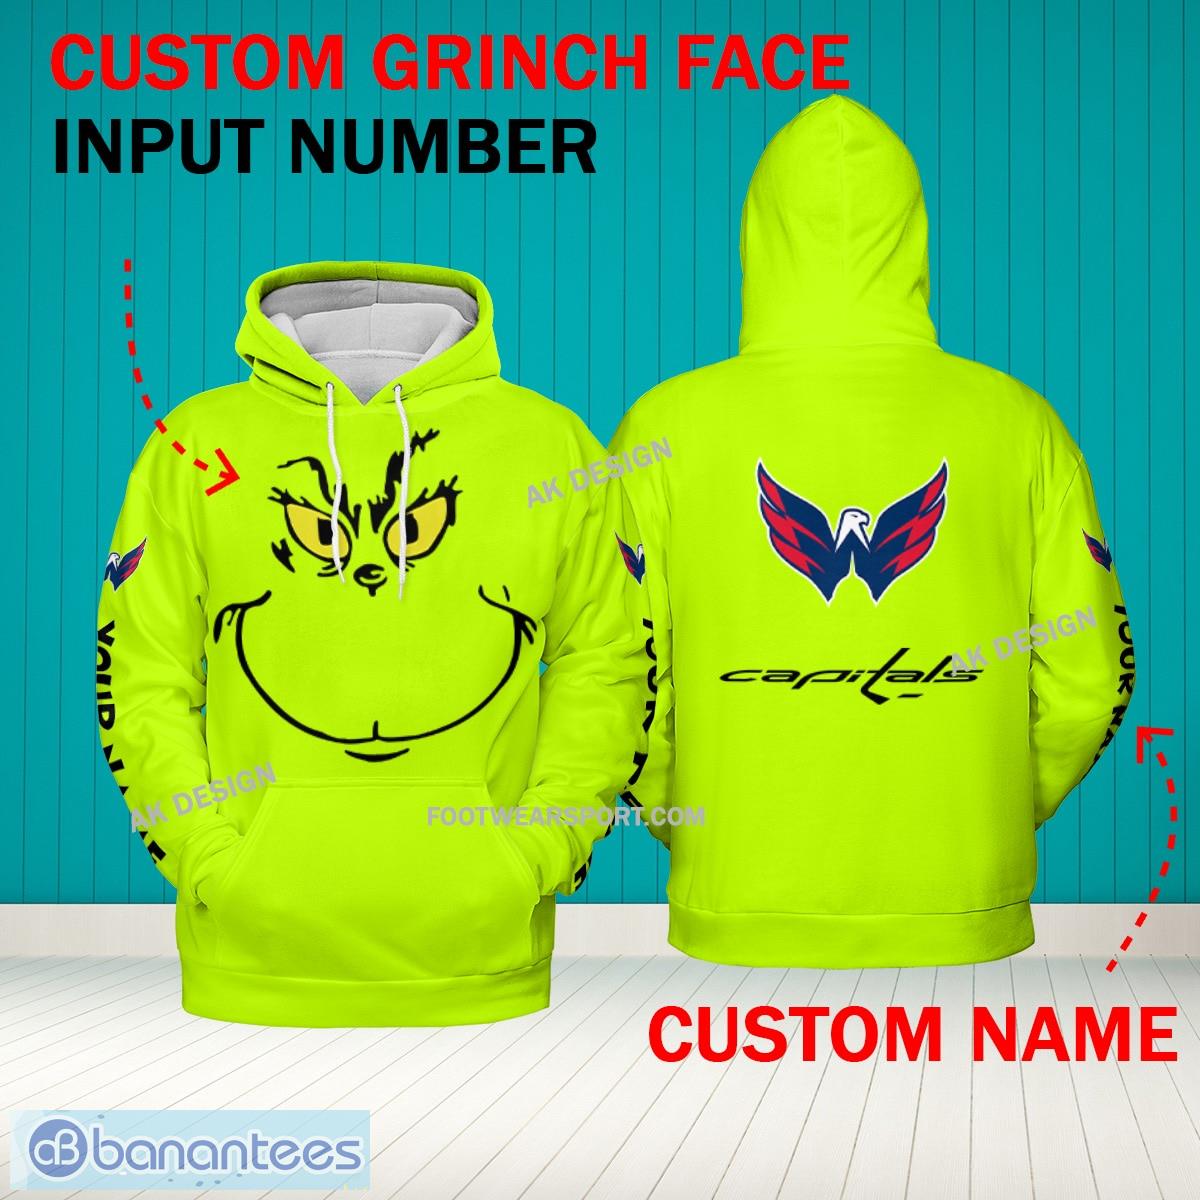 Grinch Face Washington Capitals 3D Hoodie, Zip Hoodie, Sweater Green AOP Custom Number And Name - Grinch Face NHL Washington Capitals 3D Hoodie